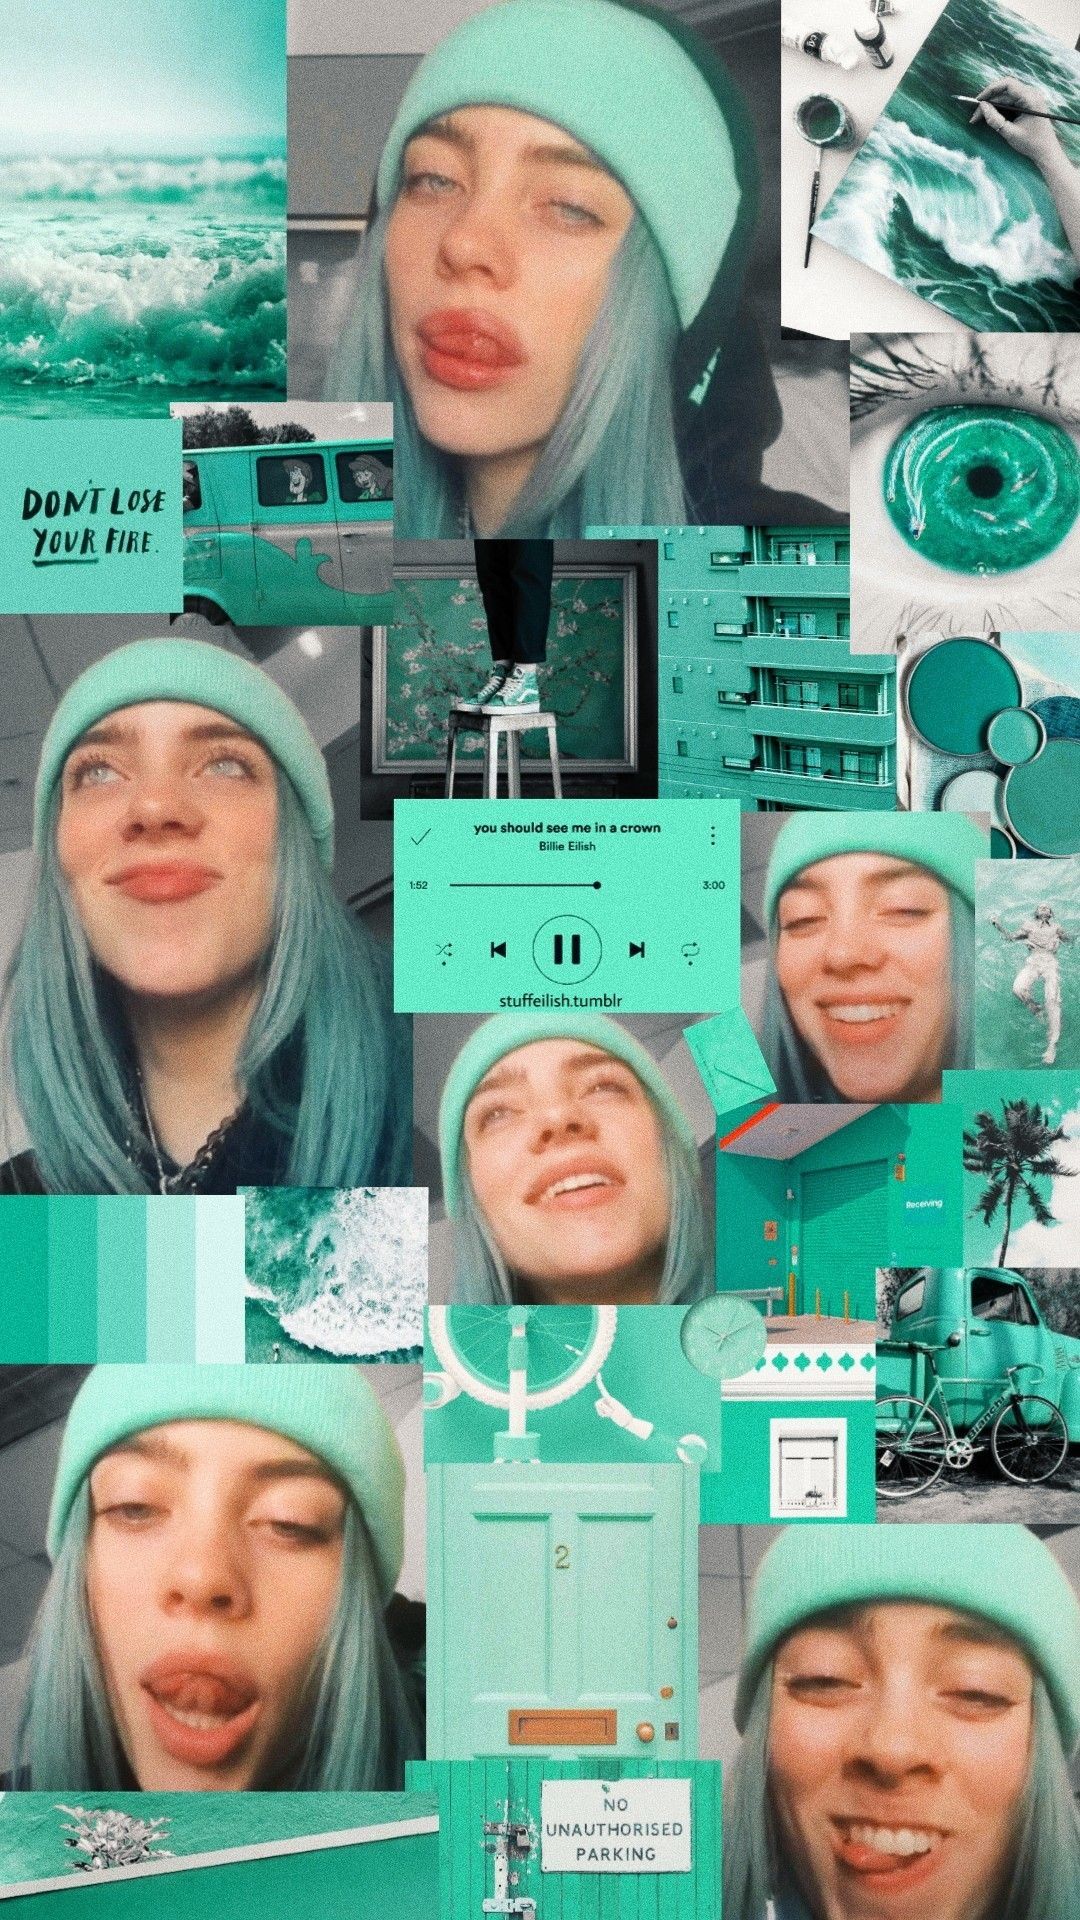 Billie Eilish Collage Wallpapers Wallpaper Cave